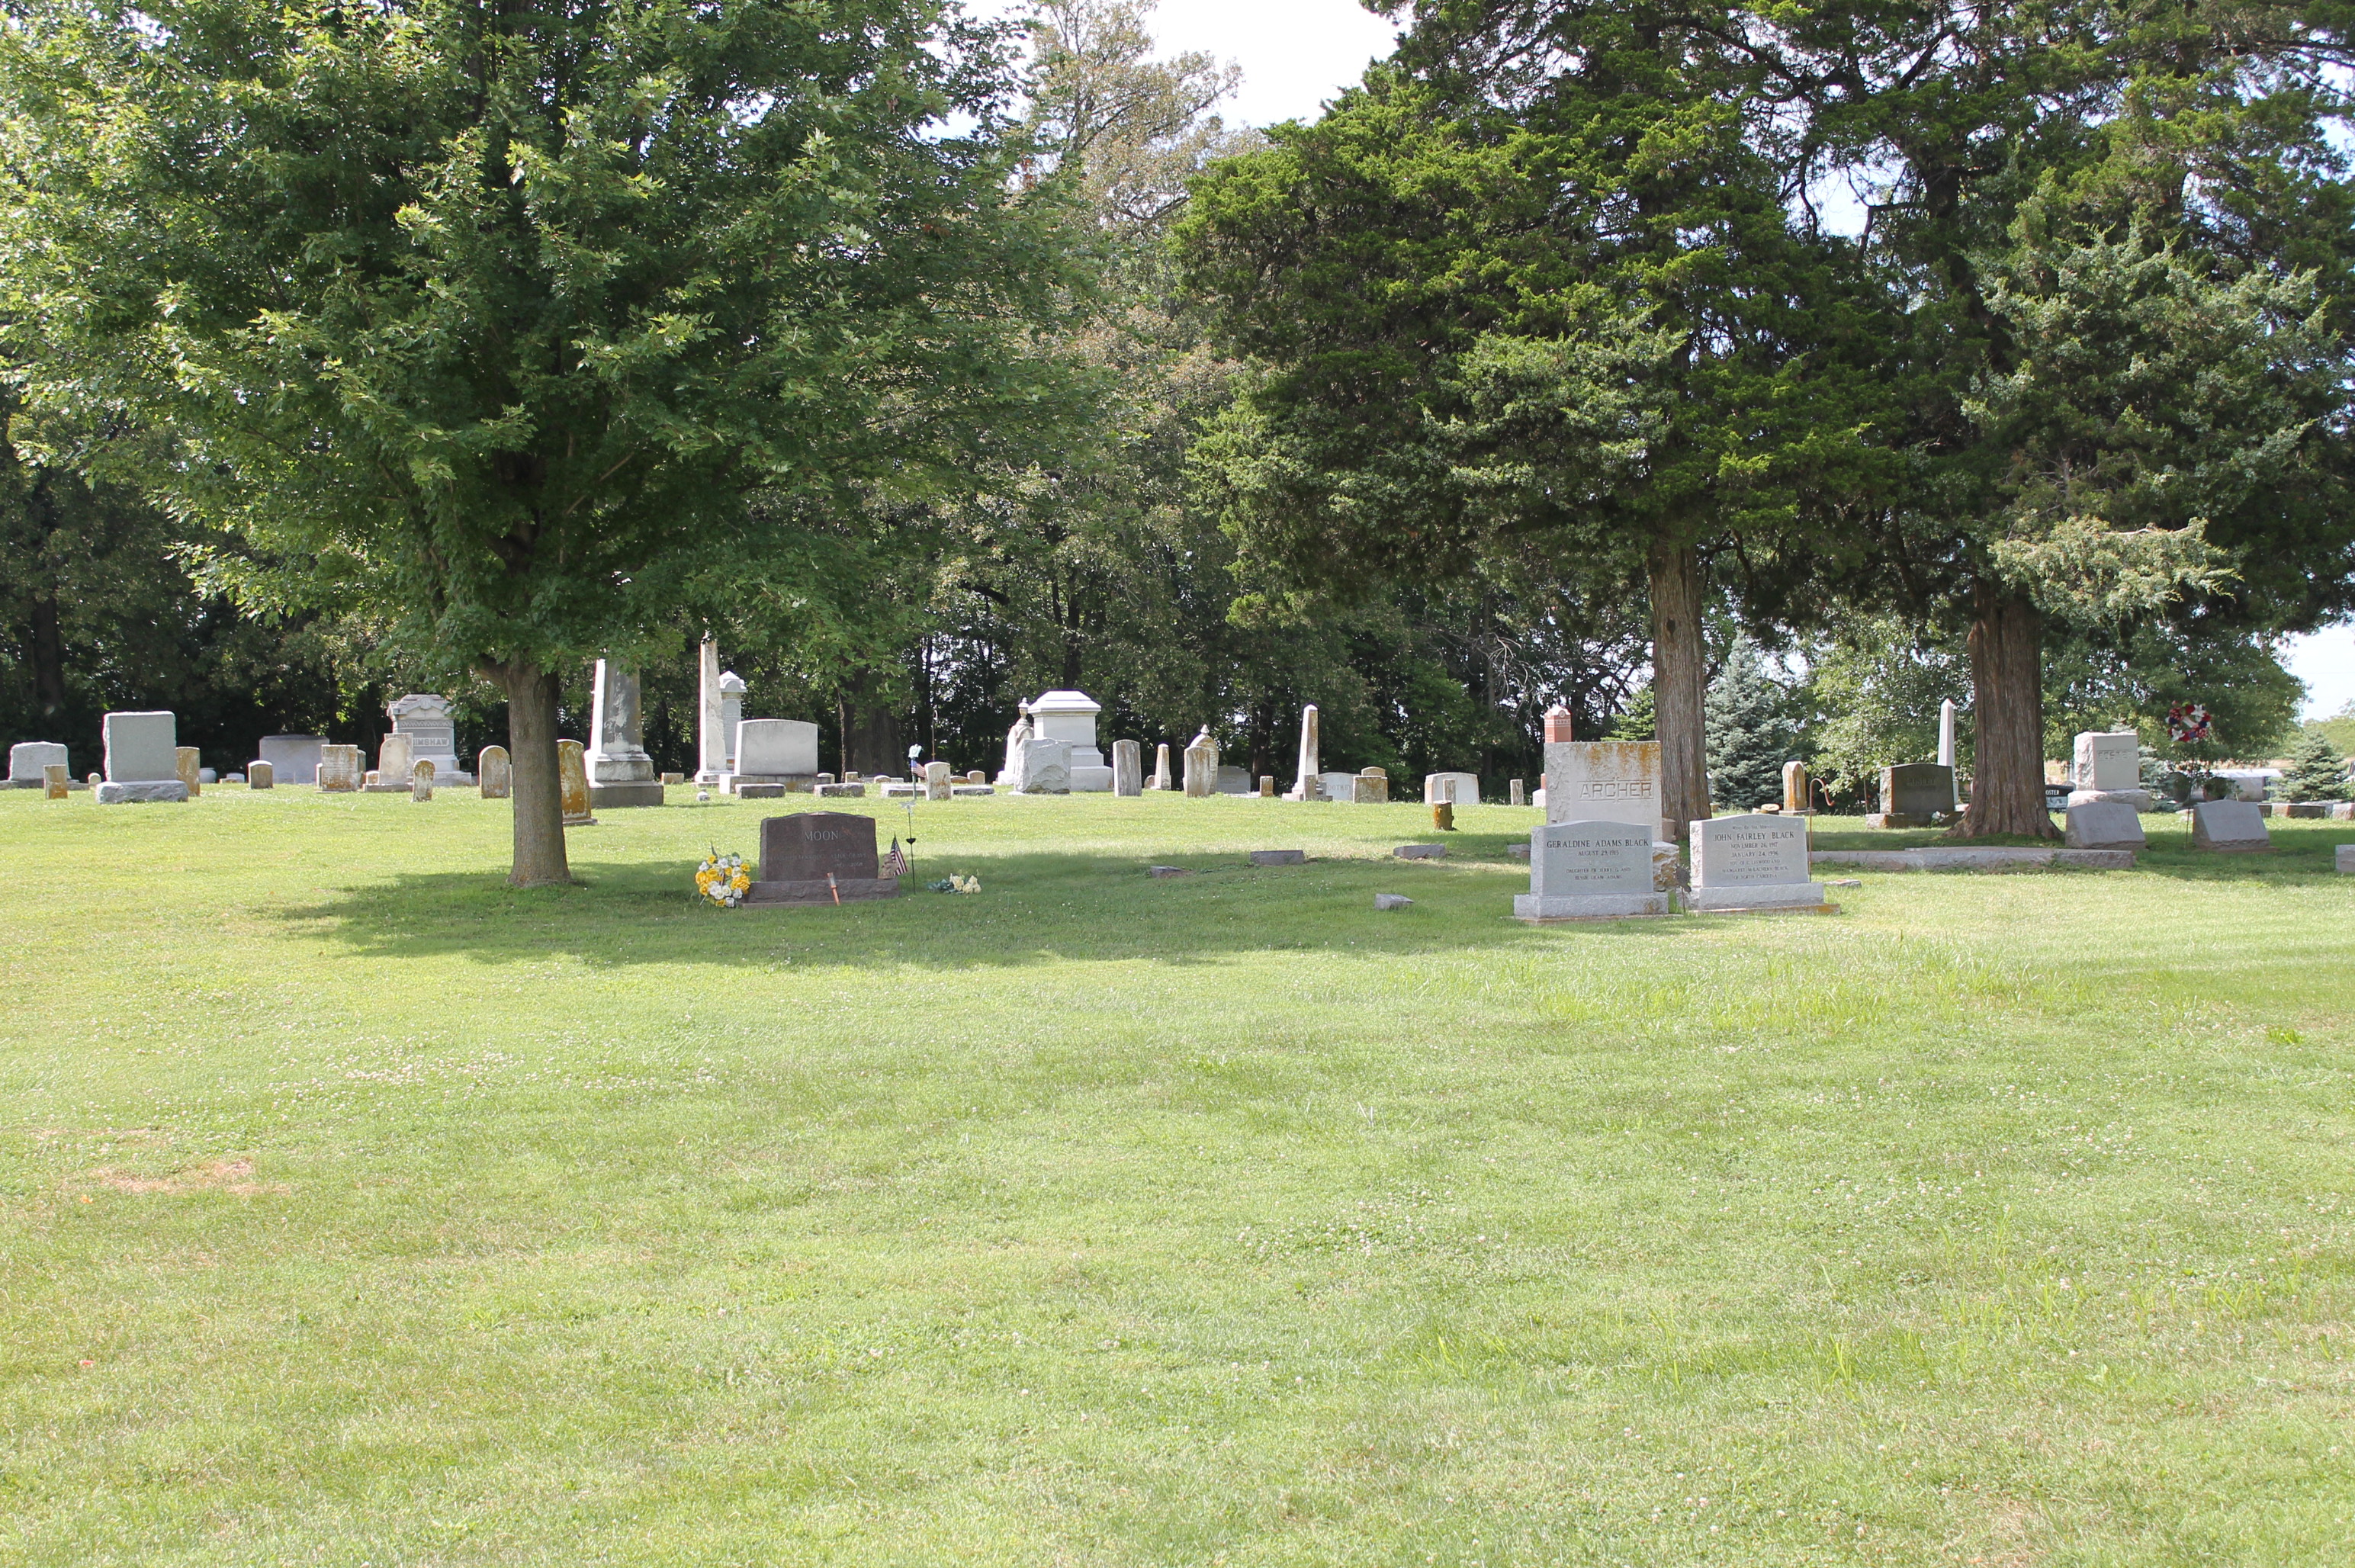 Headstones in St. Stephens Episcopal Cemetery - Pittsfield, Illinois